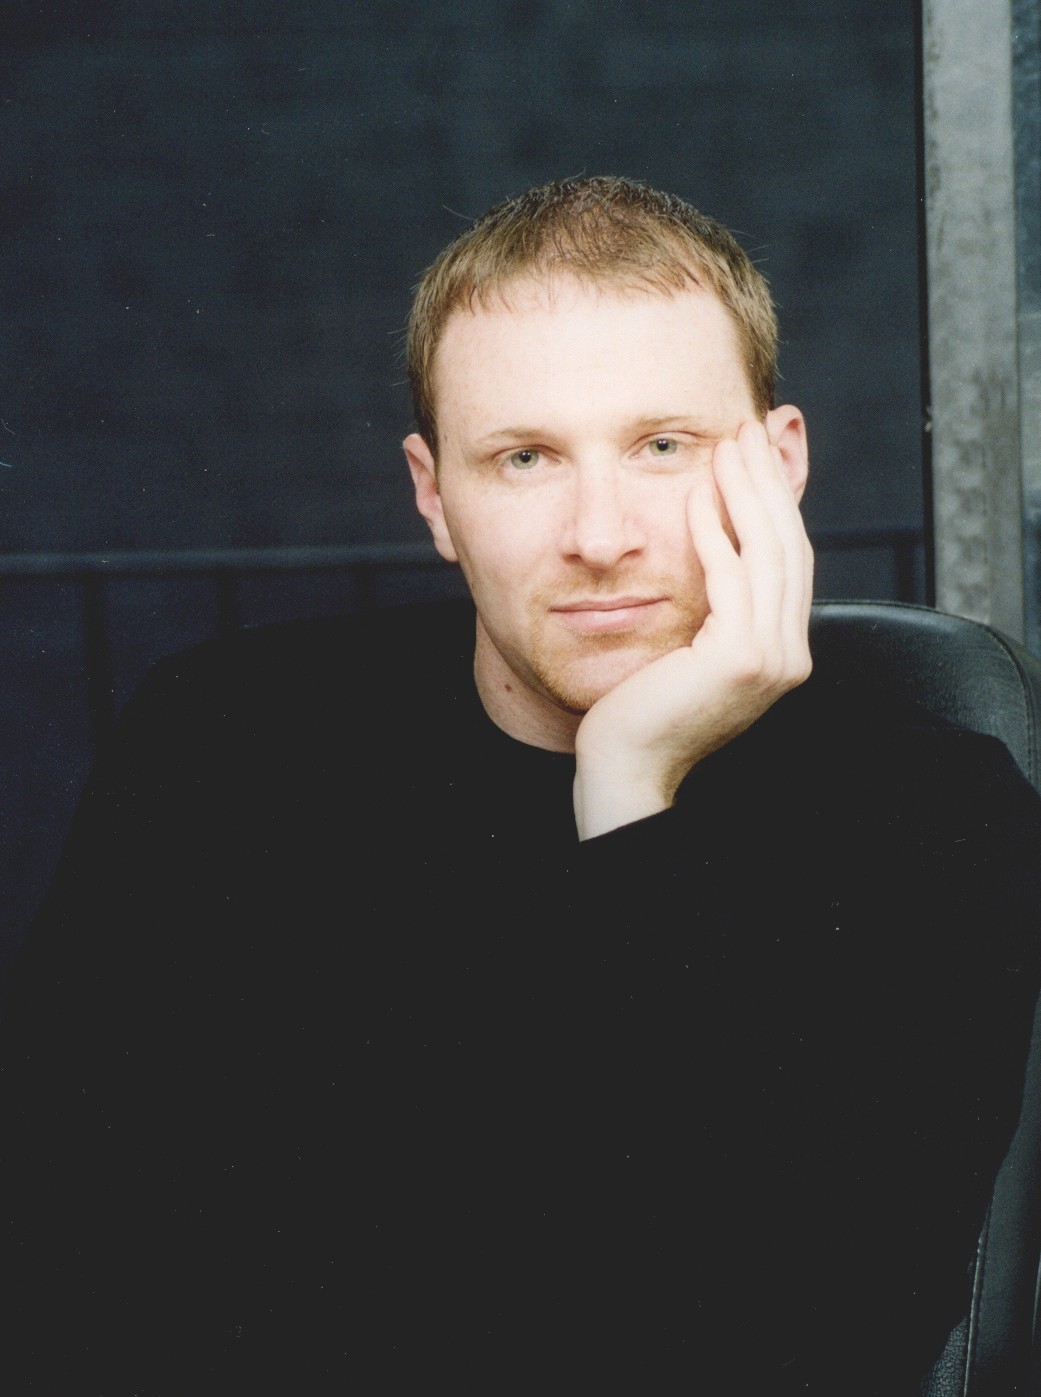 A photo of Christopher, who is wearing a black shirt and has his left hand cradling his face.